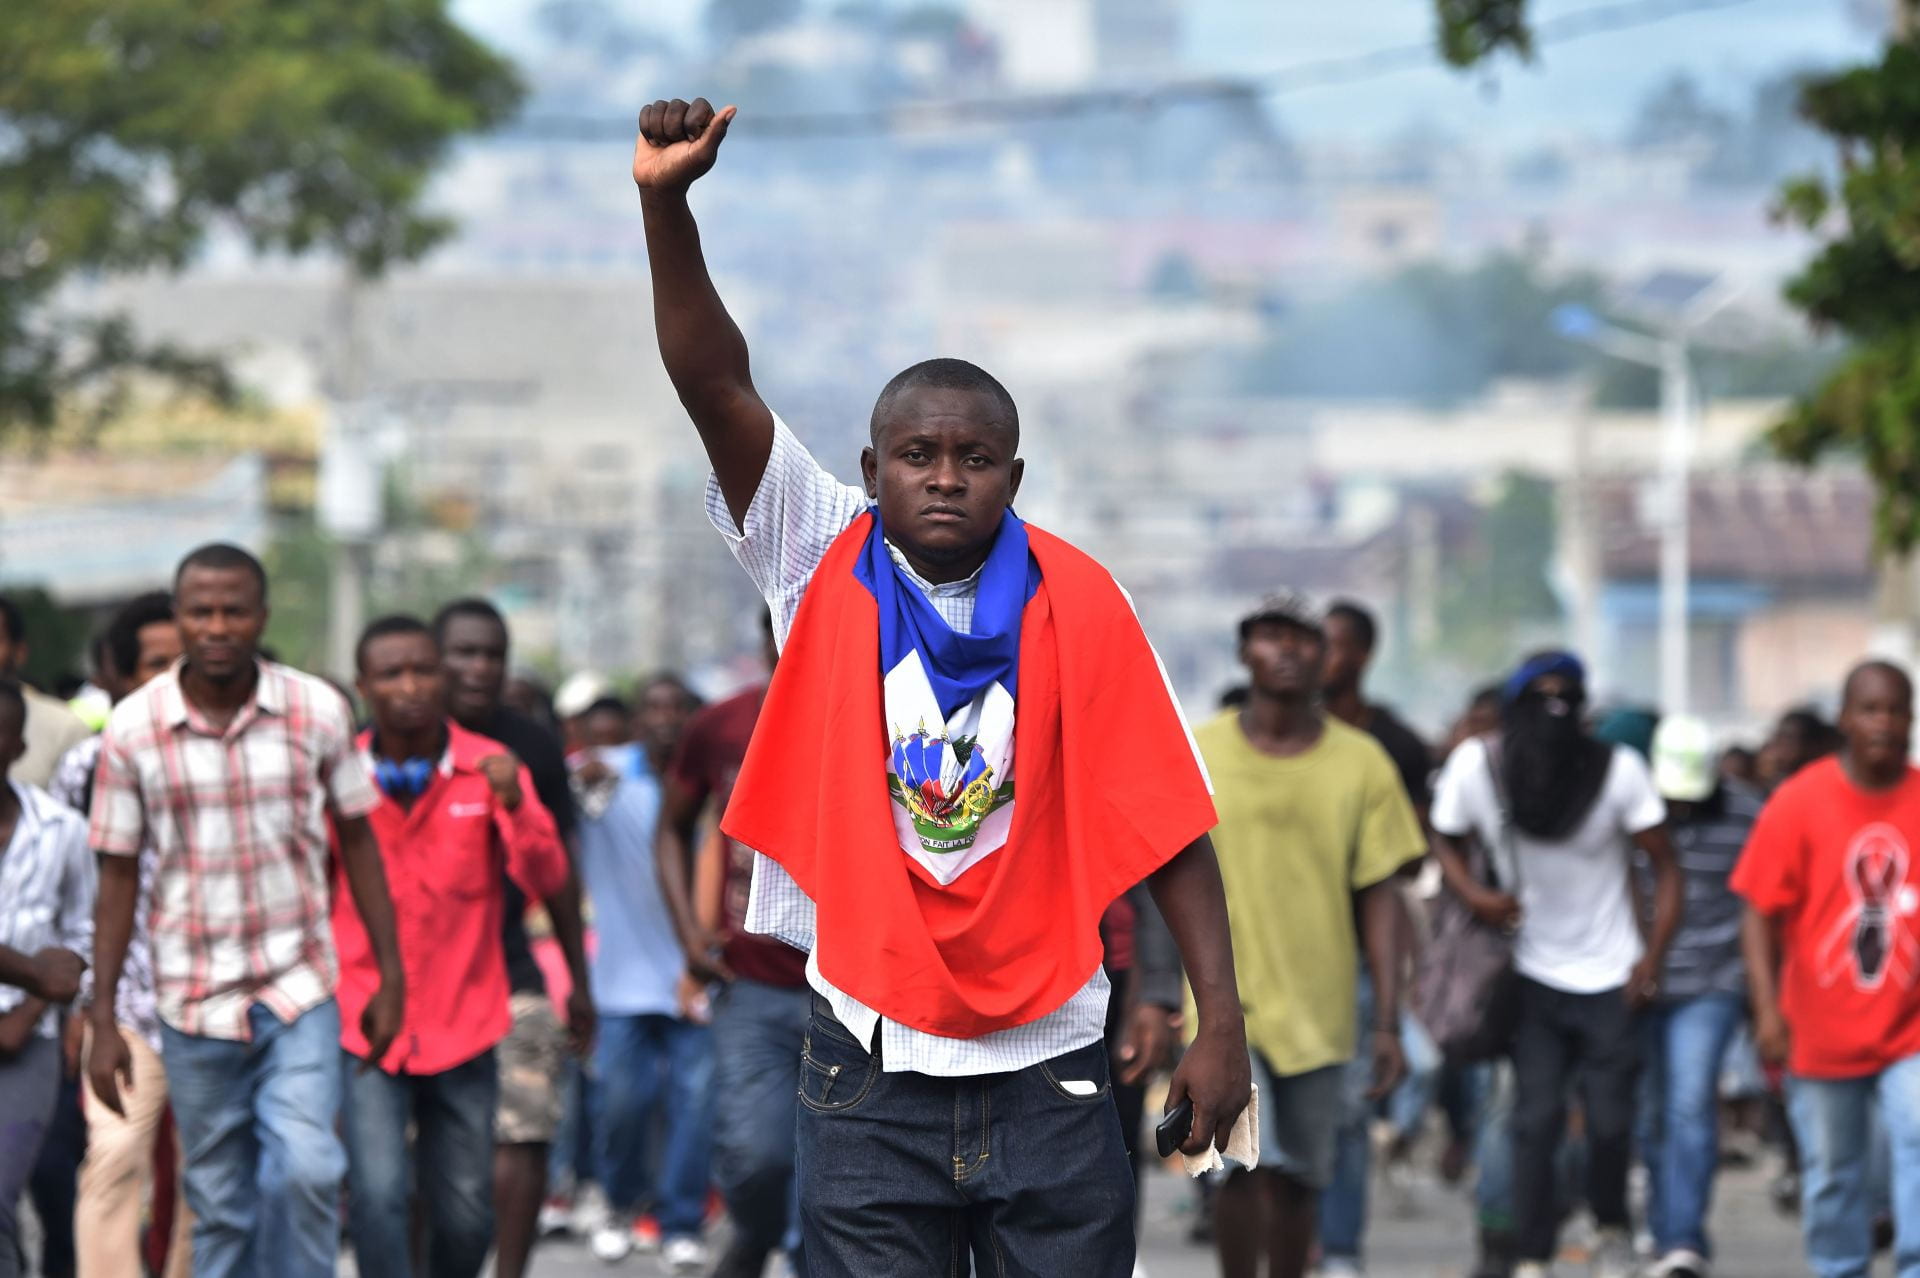 The Unrest in Haiti: Country in Crisis